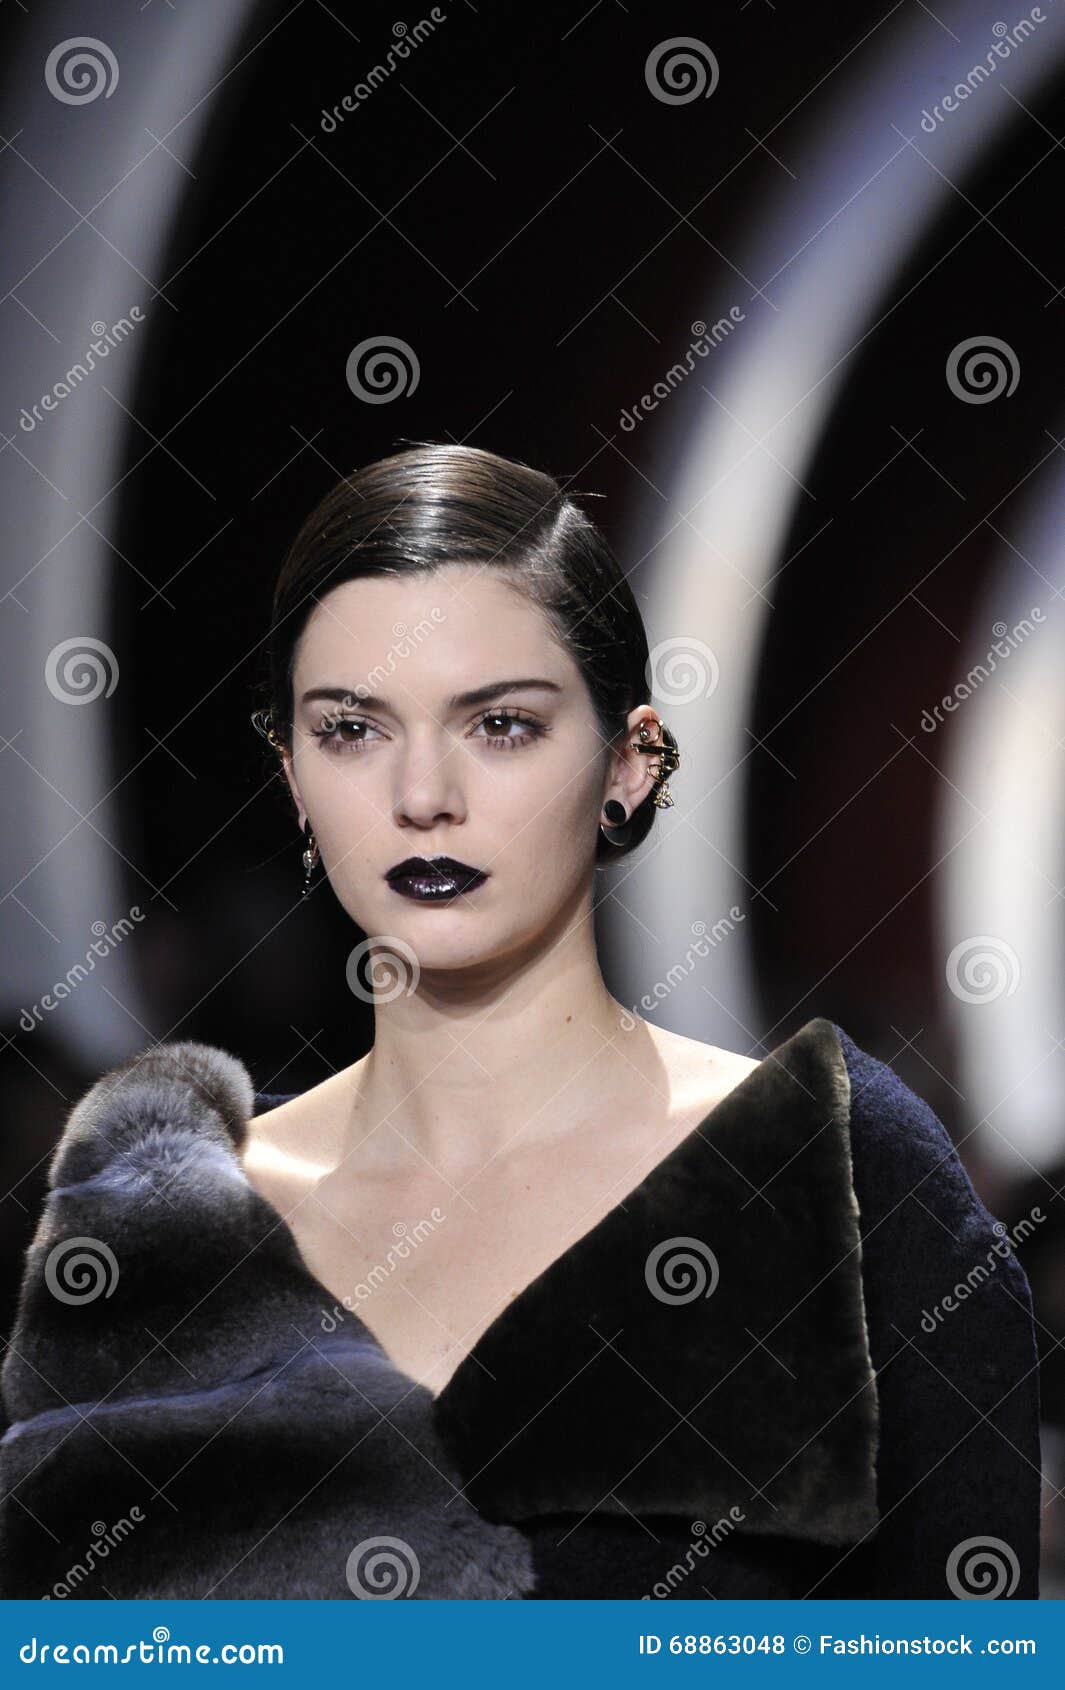 Kendall Jenner walks the runway during the Christian Dior show as